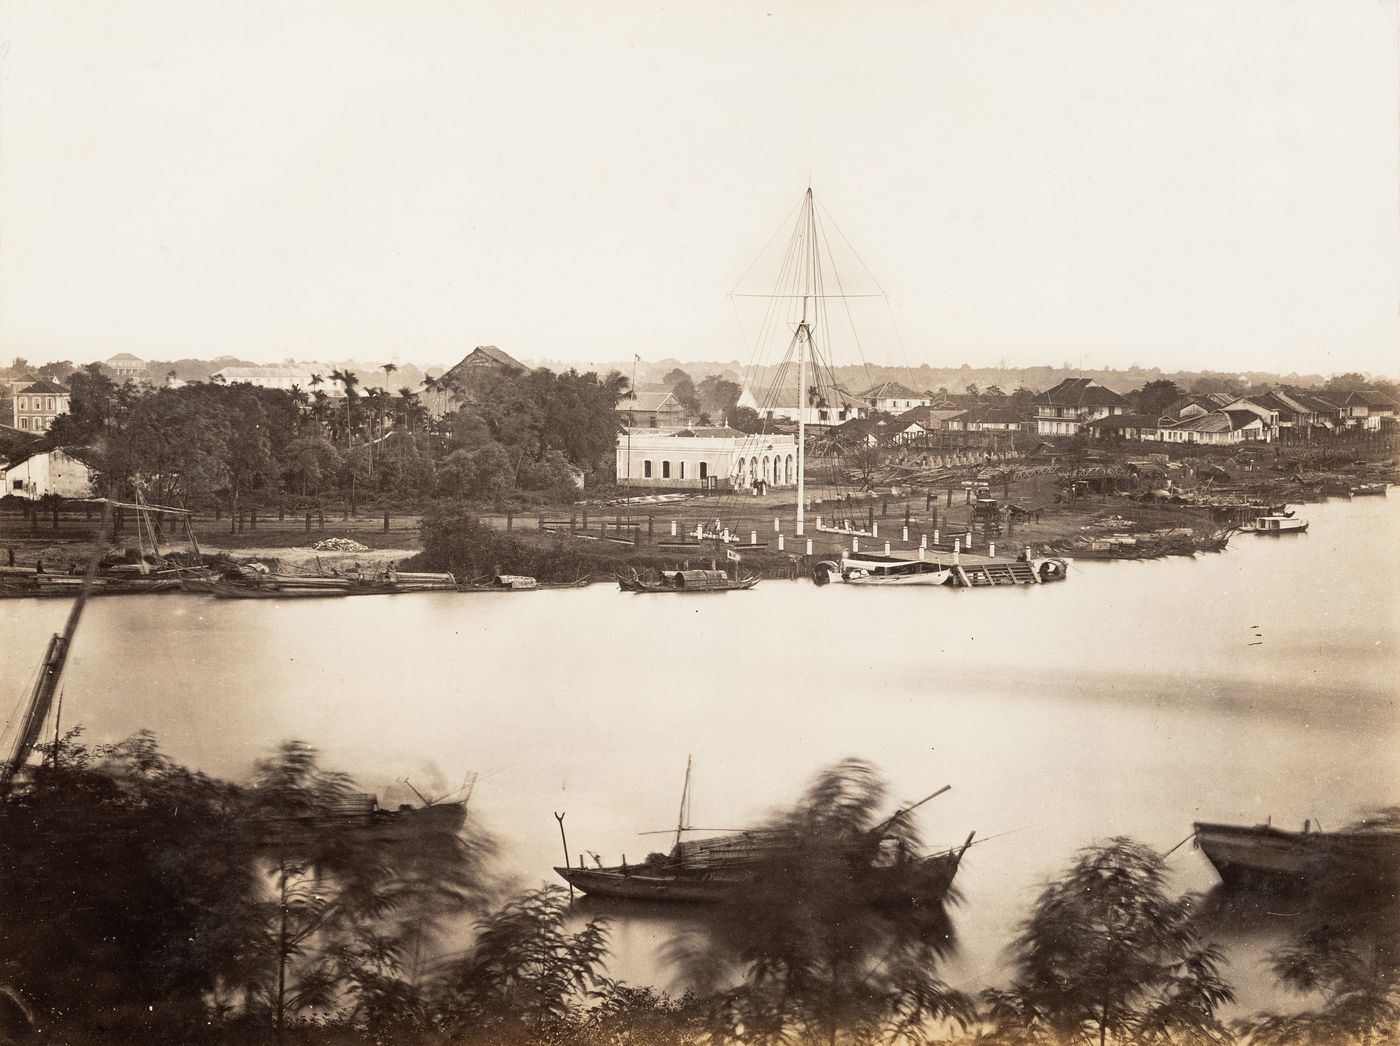 View of the flagtower and junks from across the Saigon River [?] with a building under construction in the background, Saigon (now Ho Chi Minh City), Cochin China (now in Vietnam)